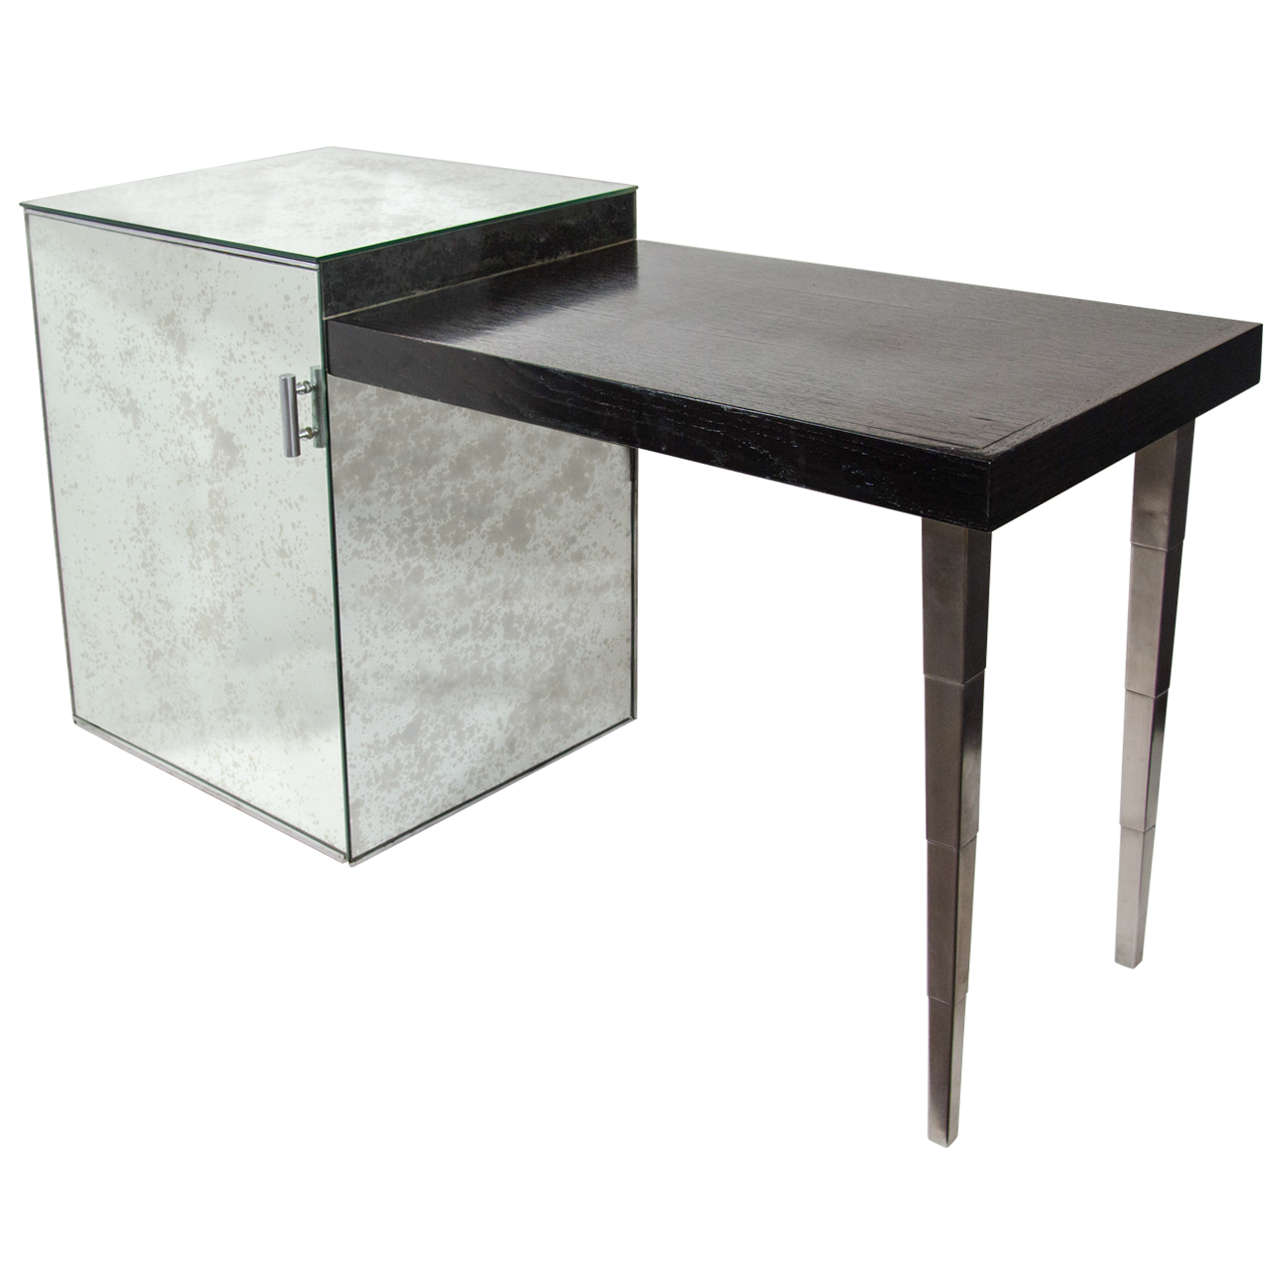 Elegant Art Deco writing table and vanity comprised of an ebonized walnut wood tabletop with an antique mirrored cabinet. The cabinet features smoked and spotted glass mirrors and has silver leaf painted interior. Features brushed nickeled support